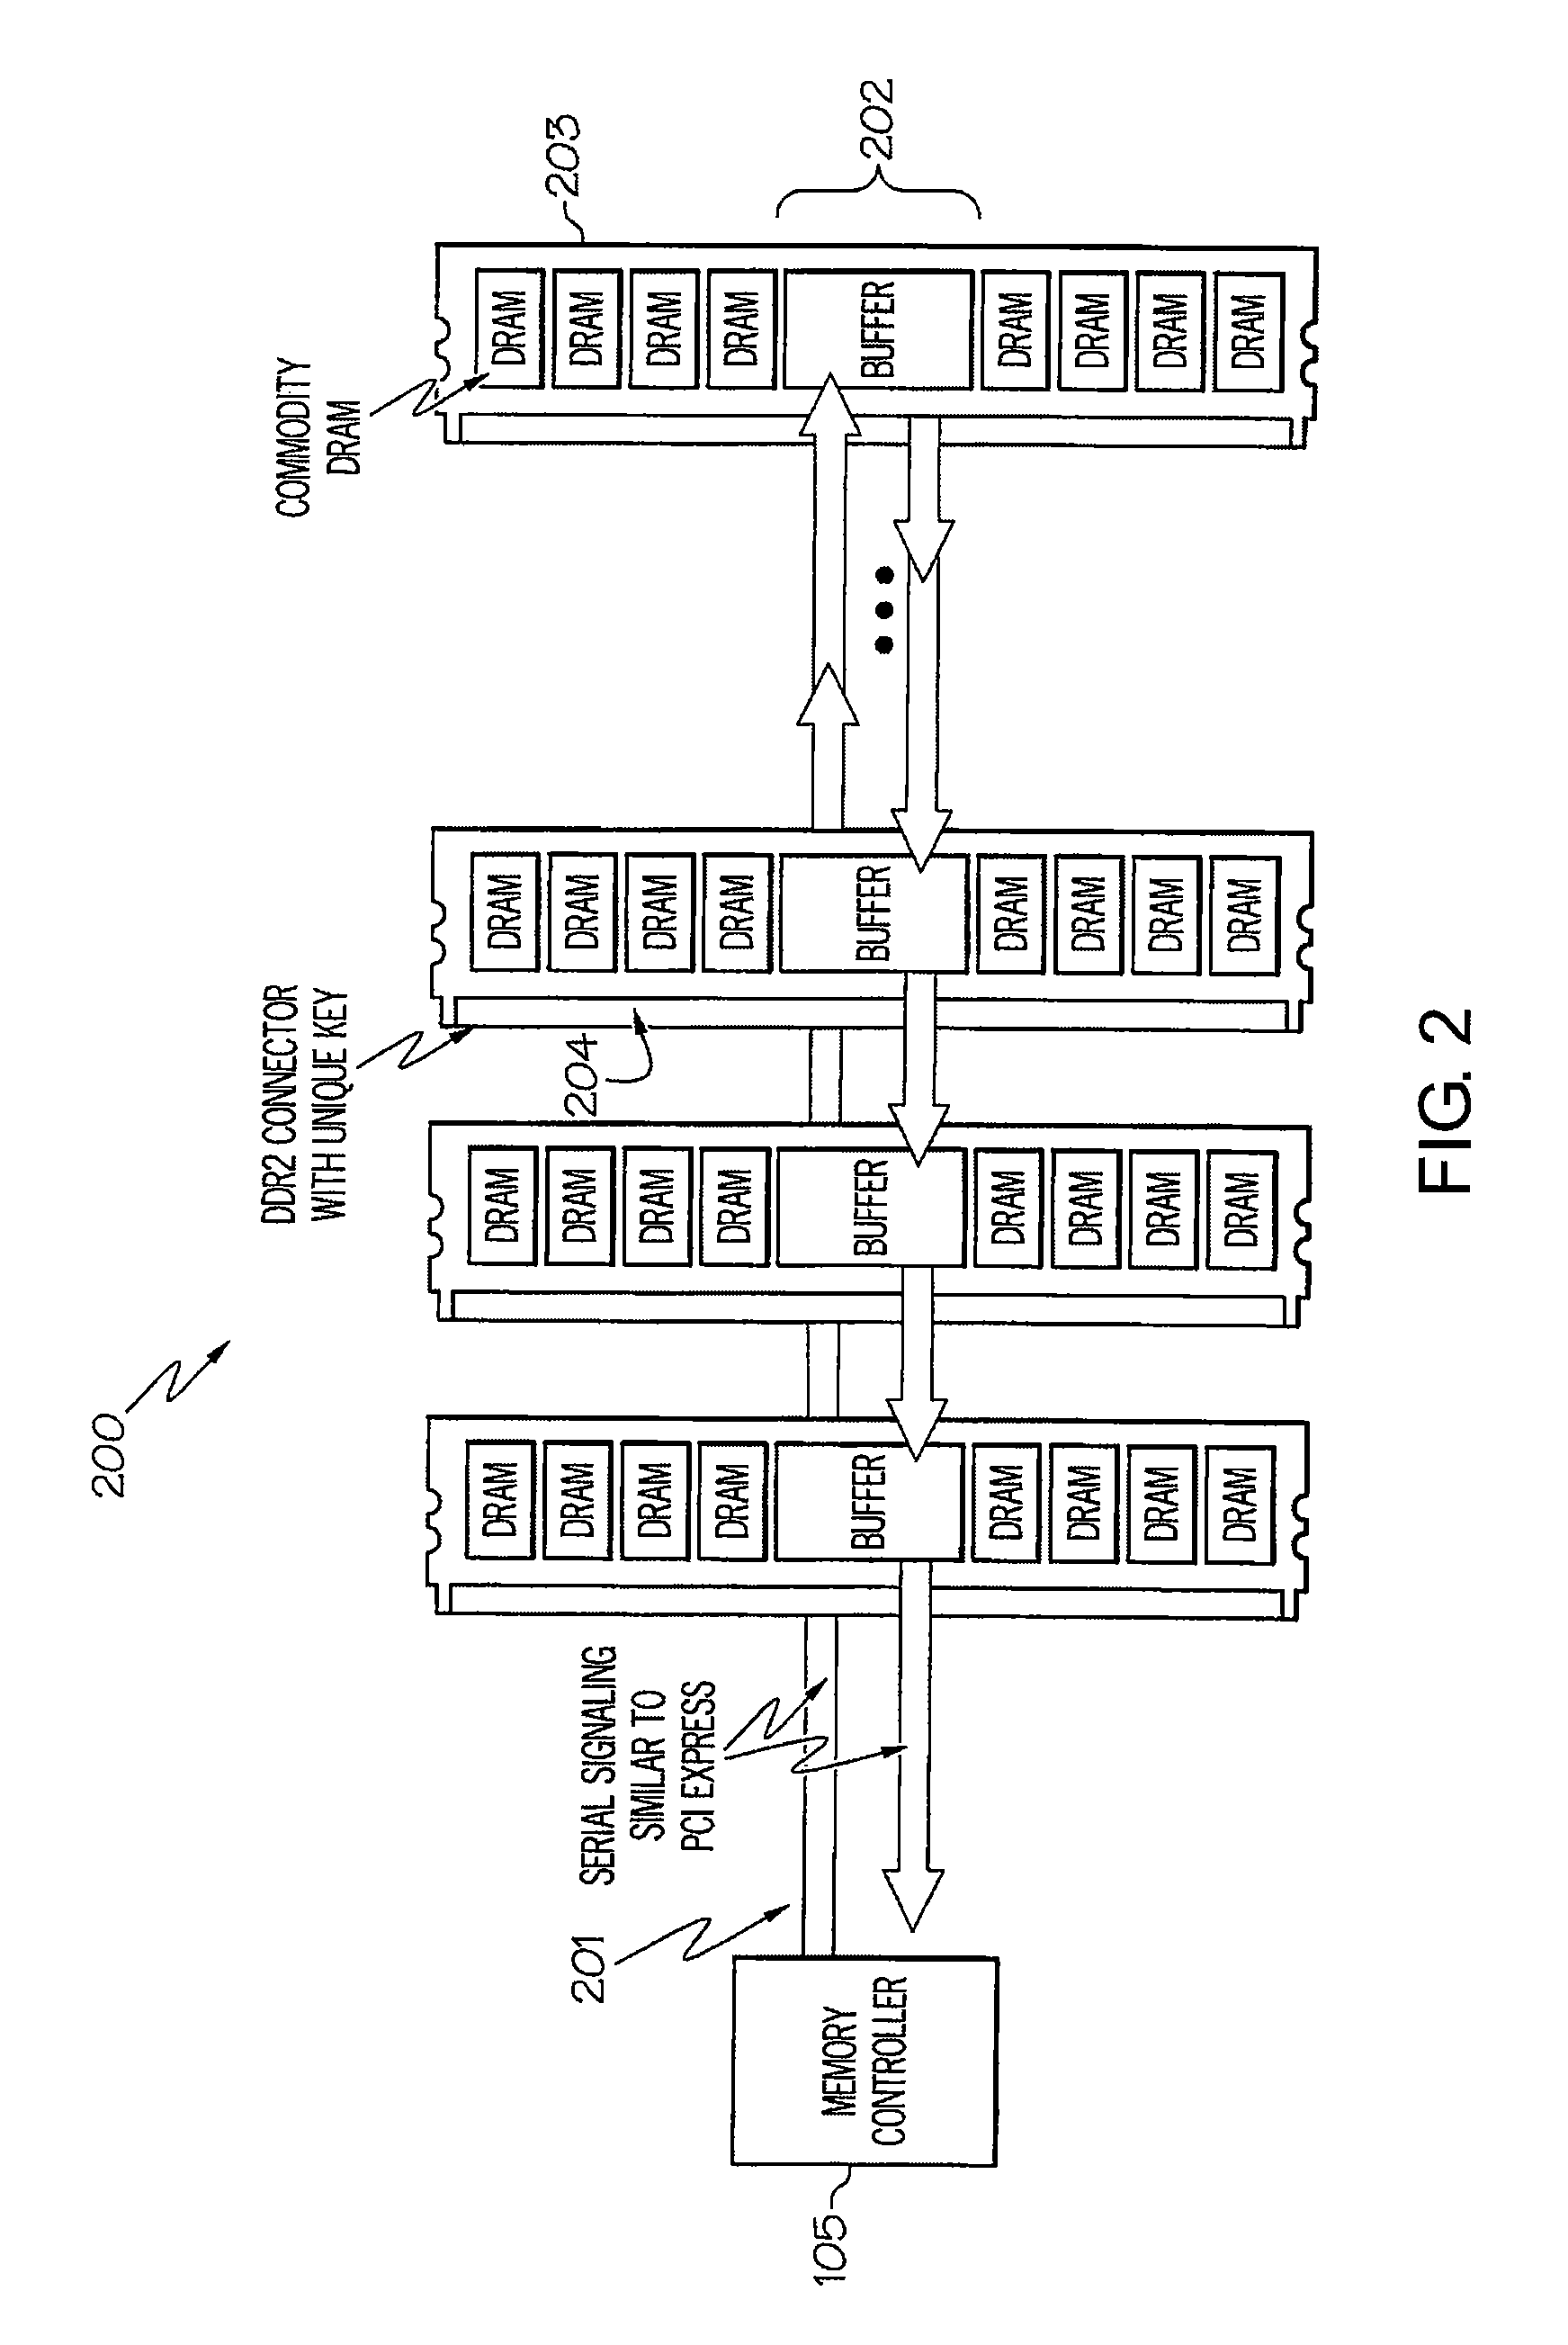 Structure for data bus bandwidth scheduling in an fbdimm memory system operating in variable latency mode